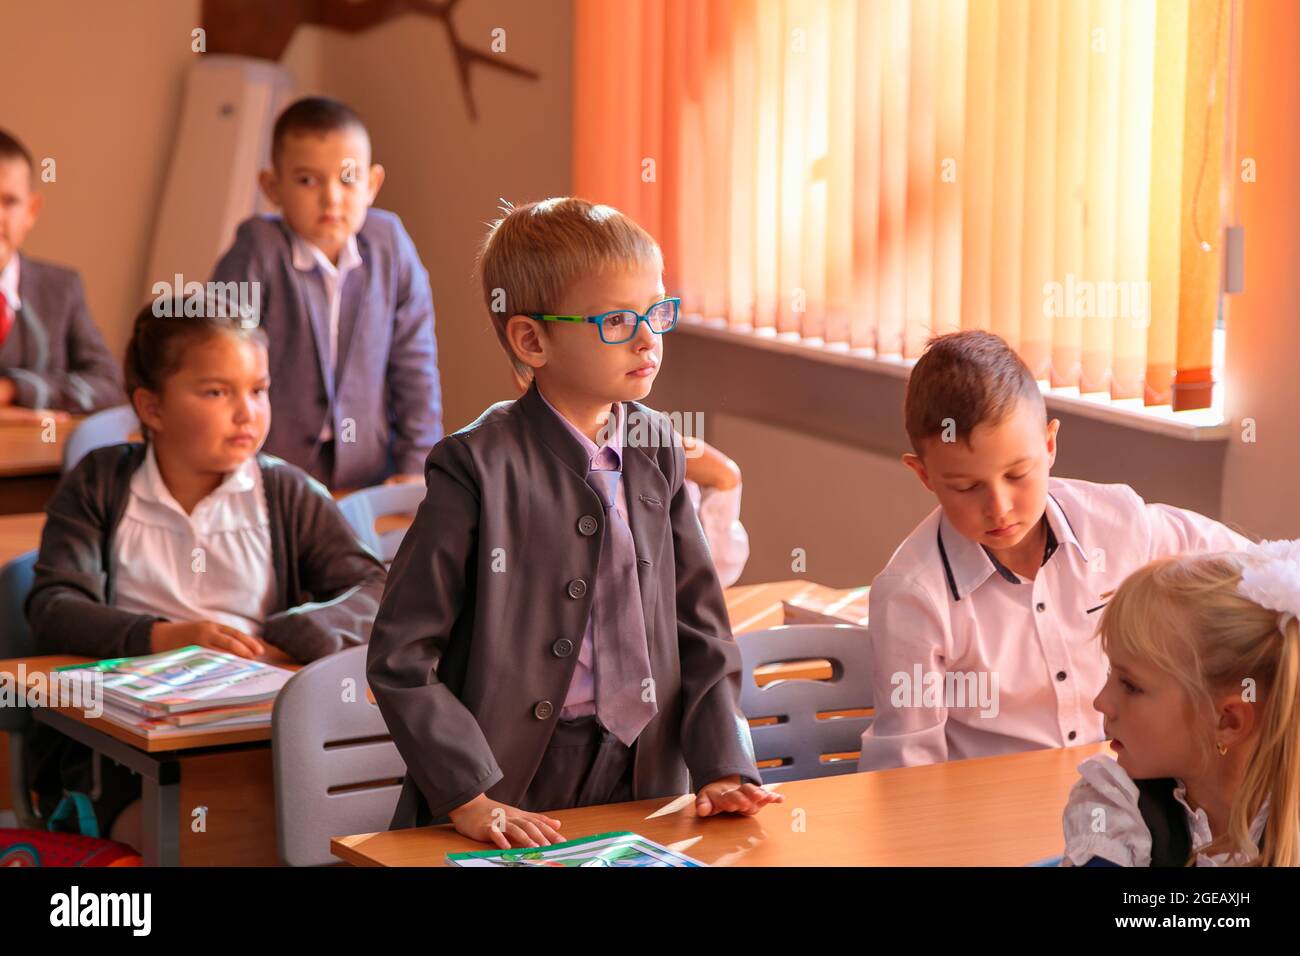 The first grader stands at the desk and answers the teacher's question. Moscow, Russia, September 2, 2019 Stock Photo